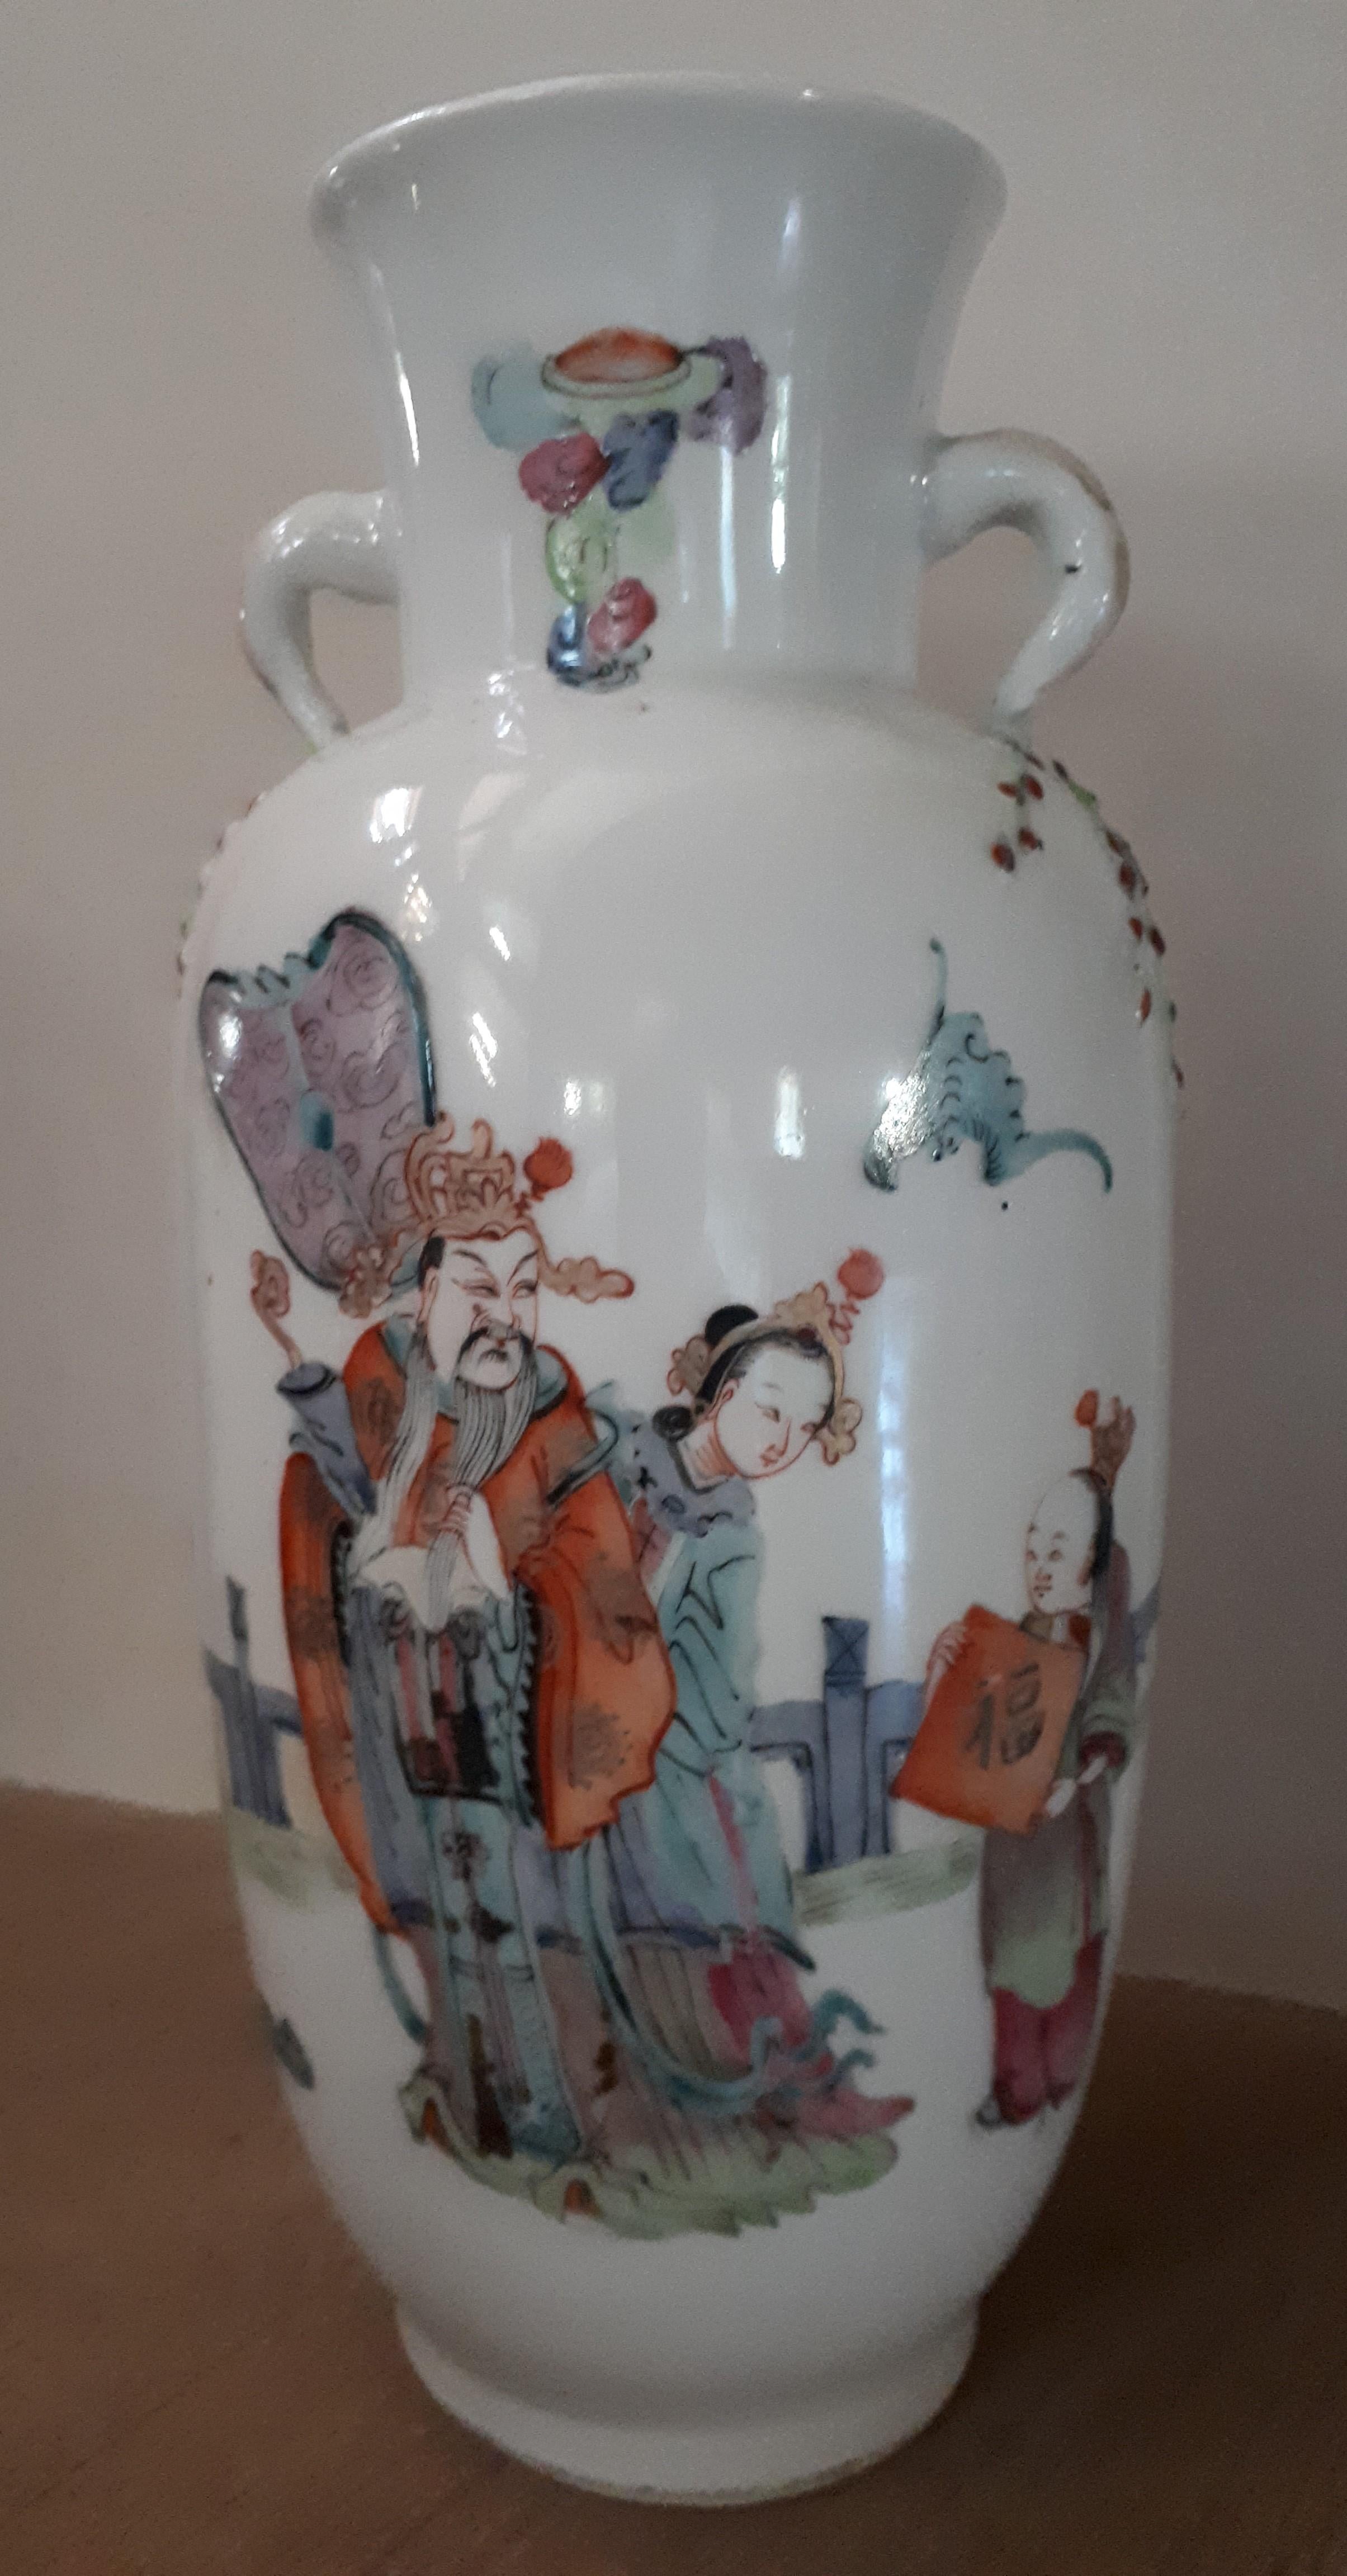 Porcelain vase with polychrome decoration with gilt highlights of figures in a garden. Marked under the base.
19th century China.